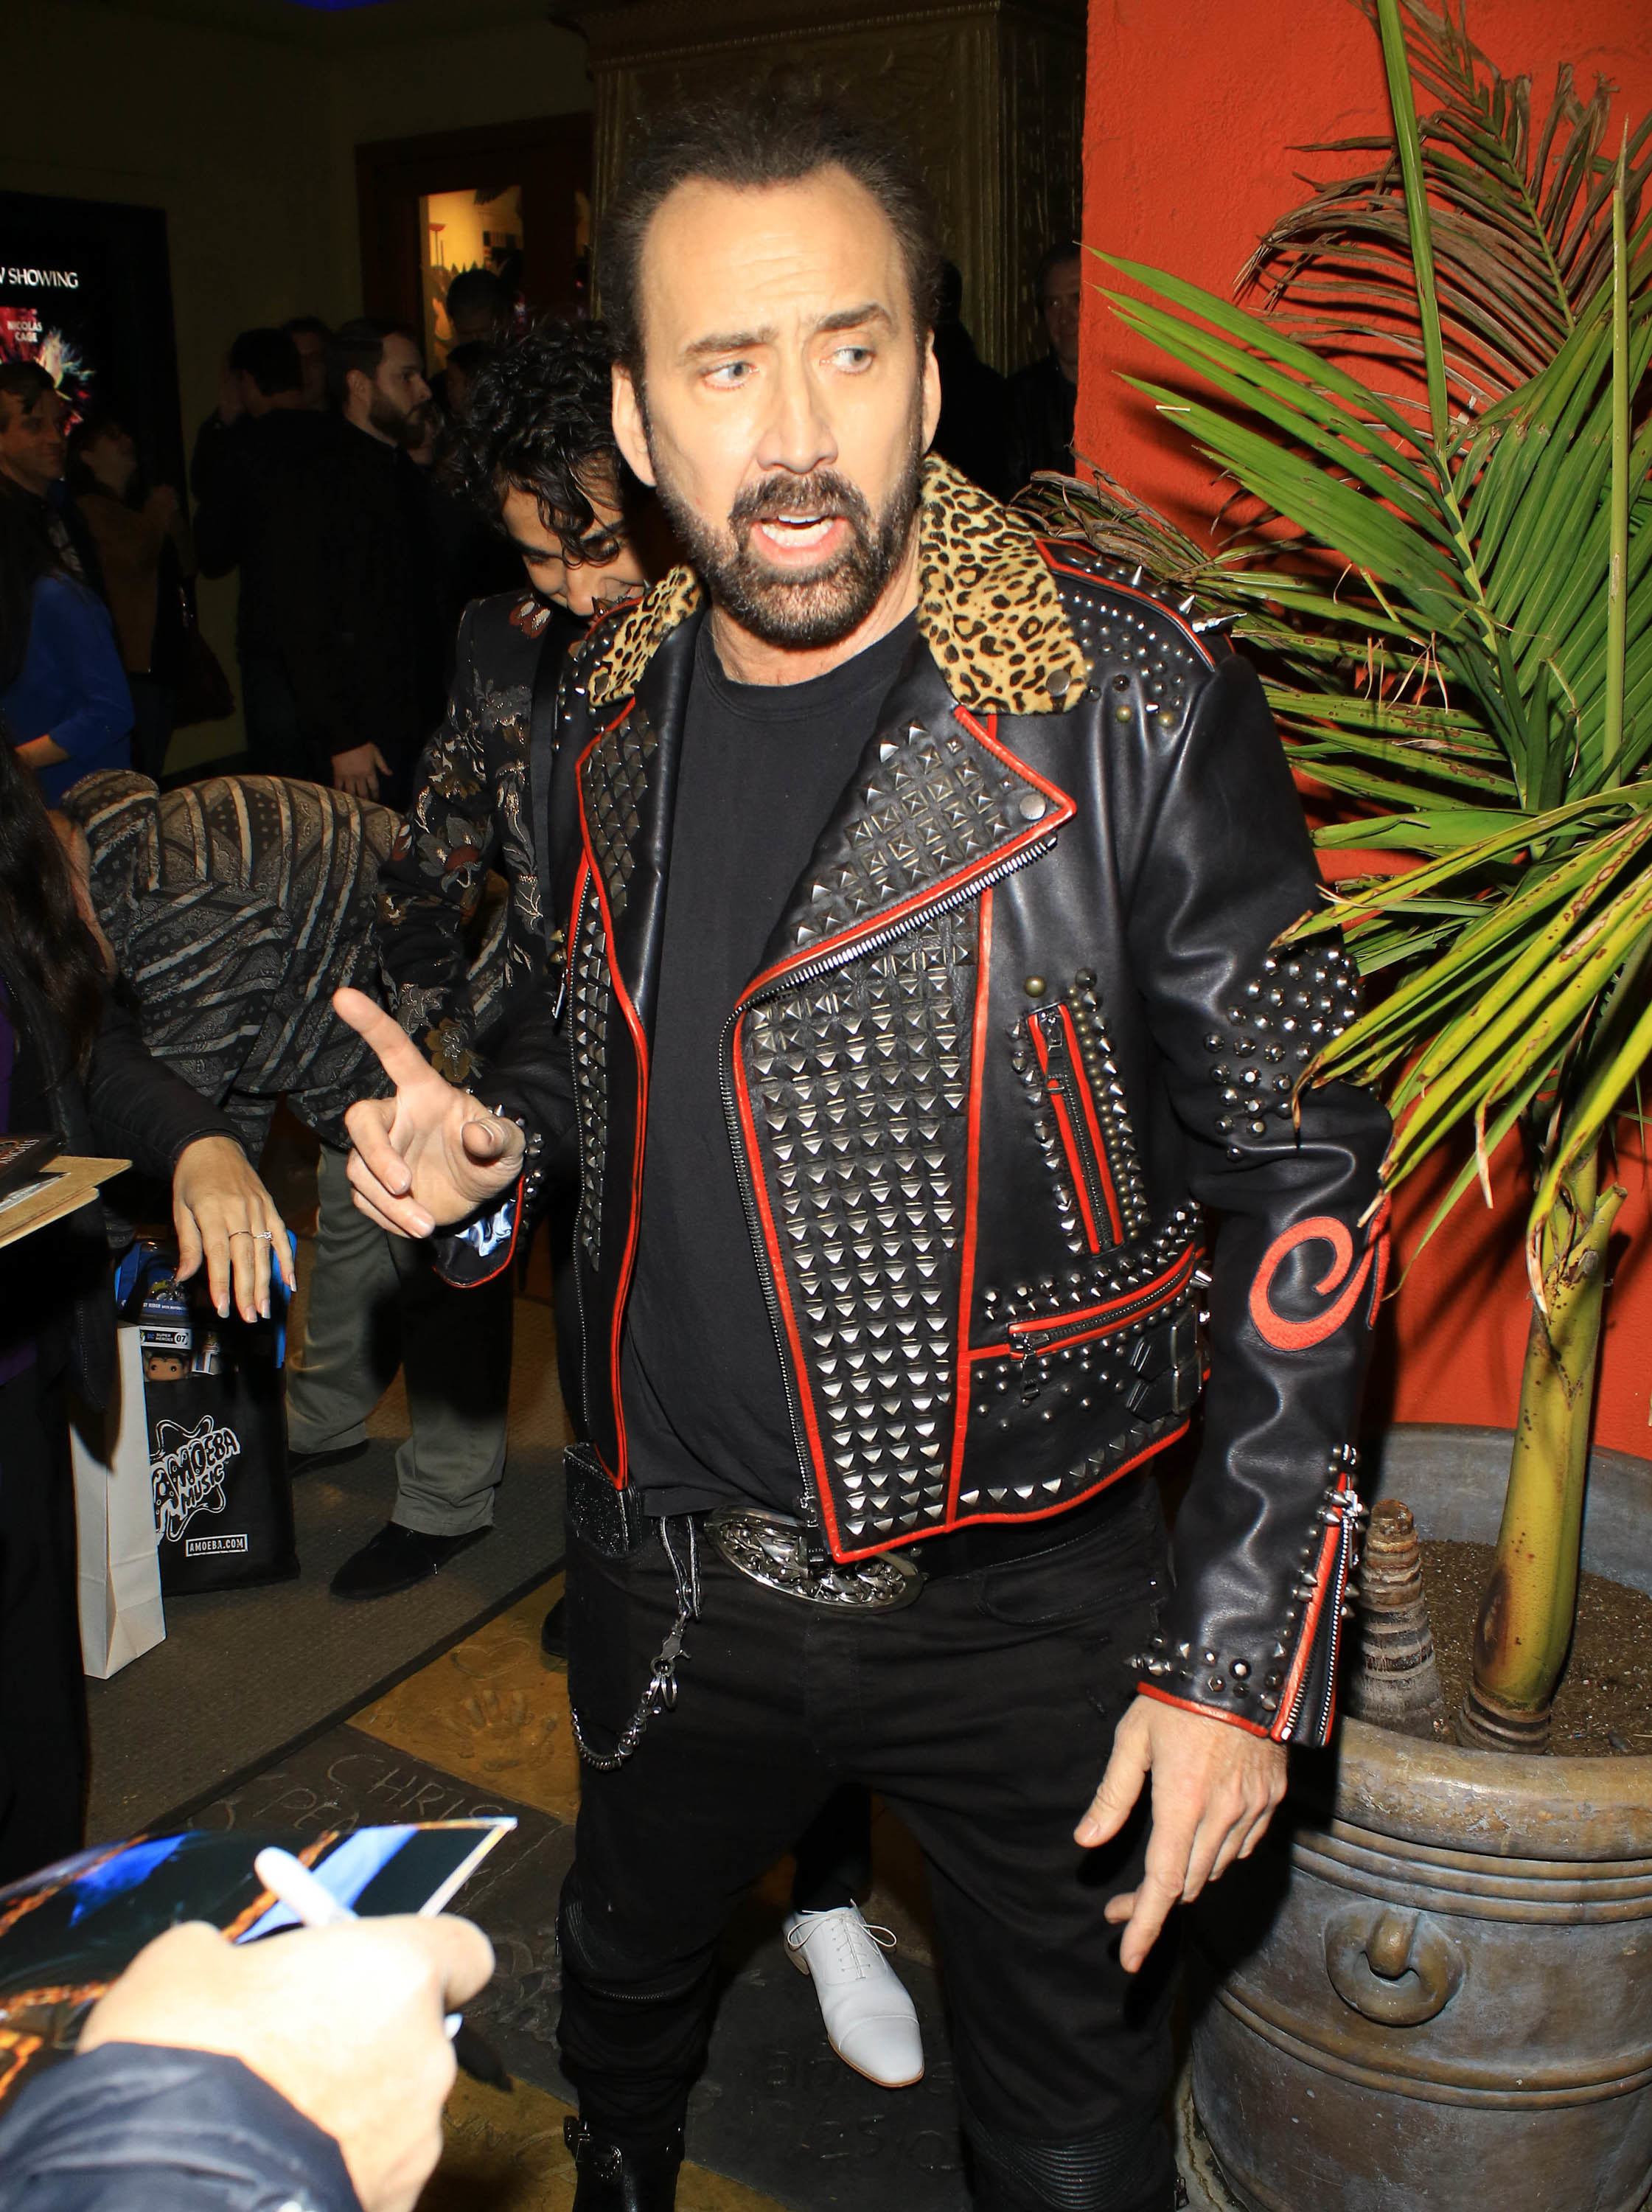 Cage wears a studded jacket